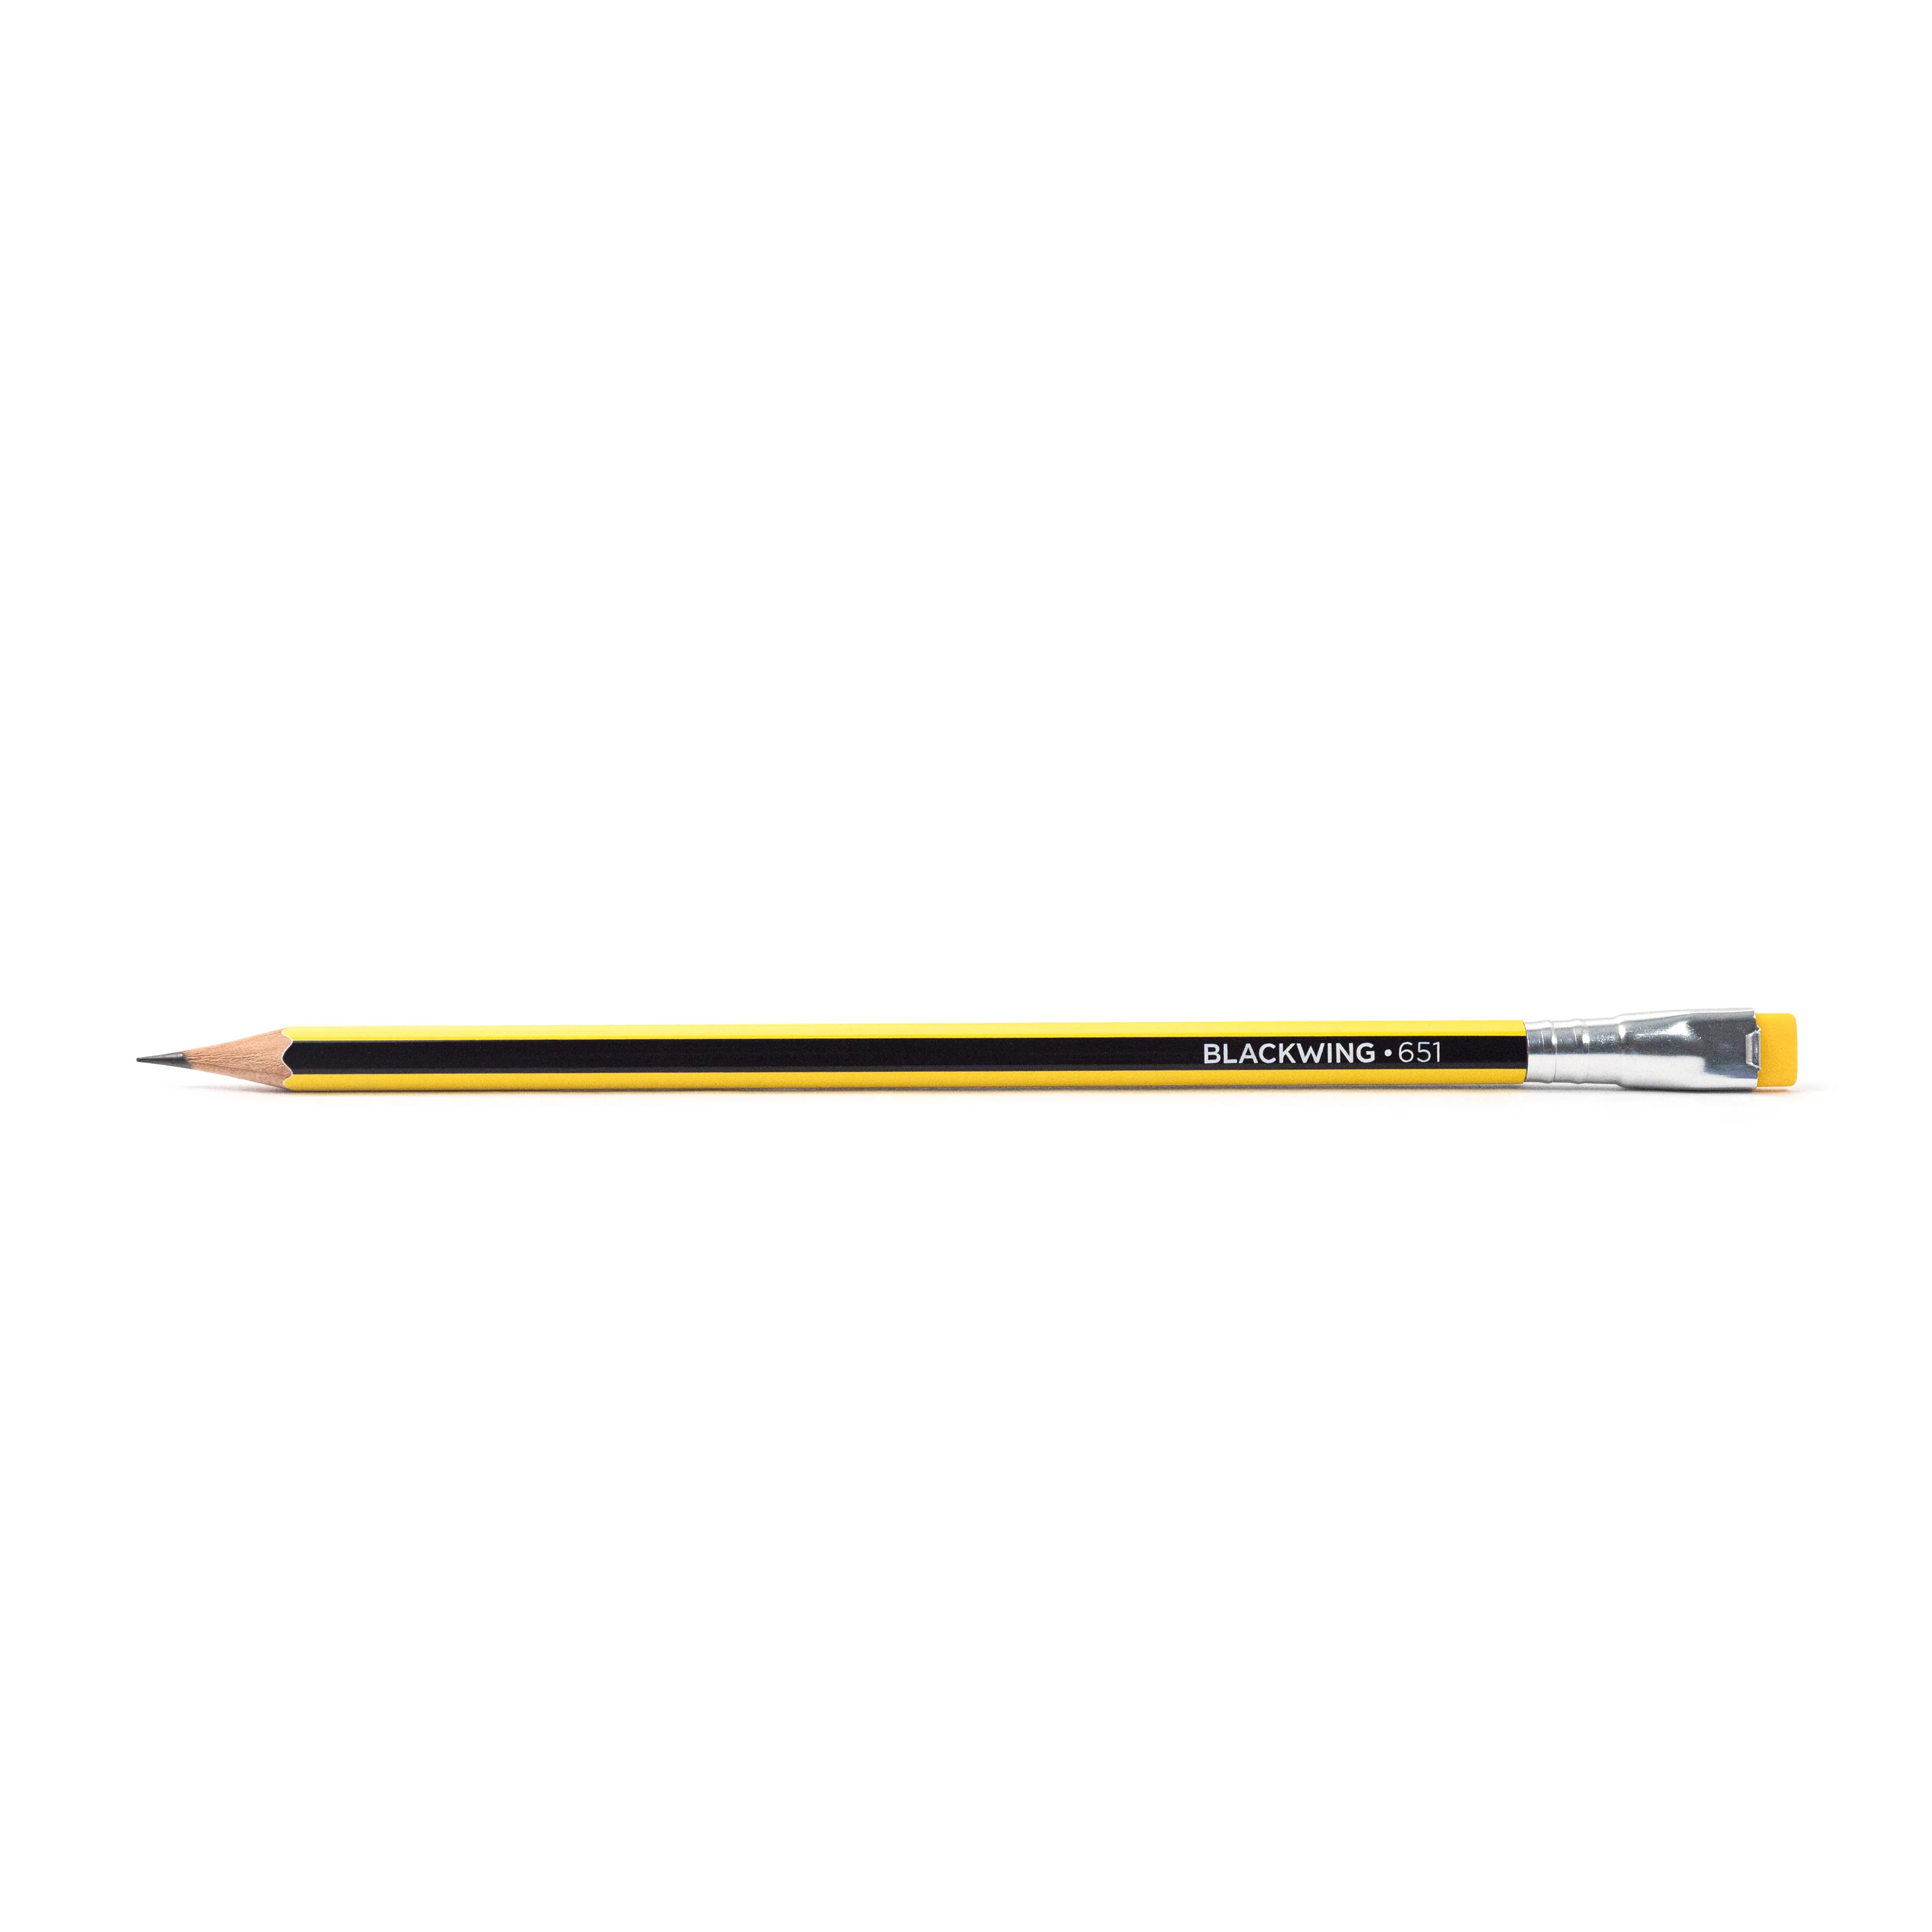 BLACKWING Bleistift VOLUMES 651 Bruce Lee  - Limited Edition